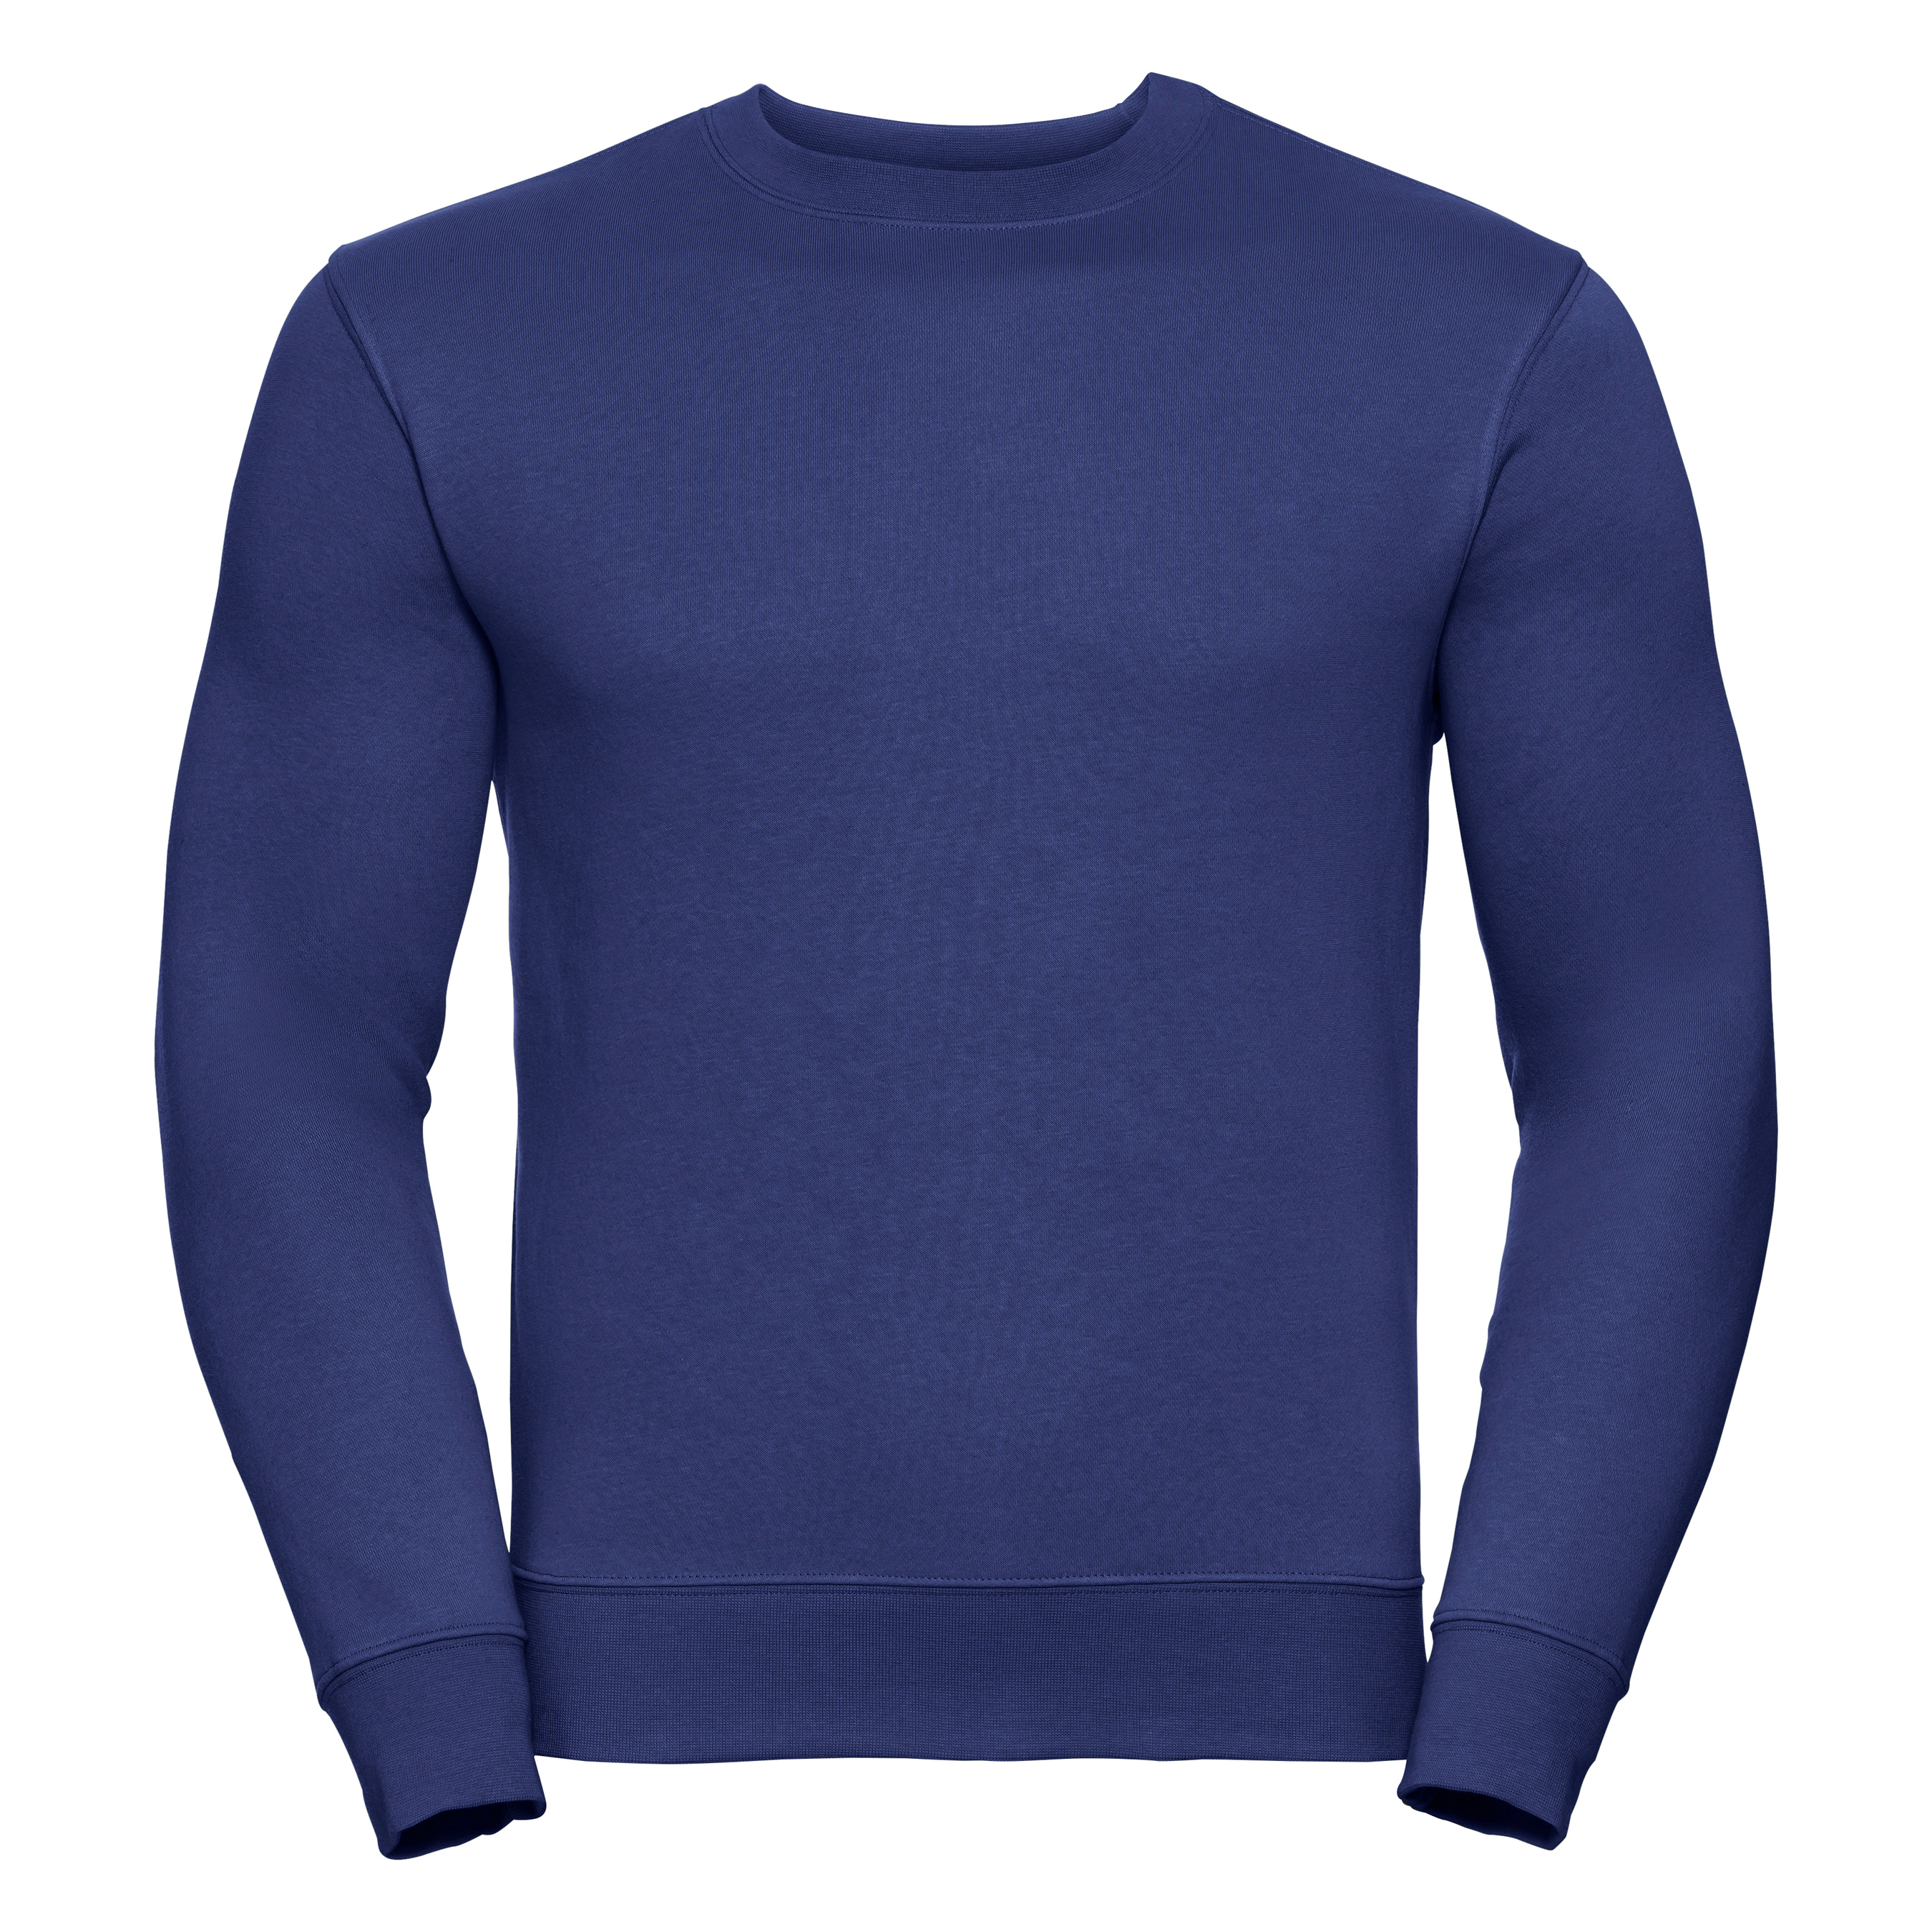 ax-httpswebsystems.s3.amazonaws.comtmp_for_downloadrussell-set-in-sleeve-sweatshirt-bright-royal.jpg